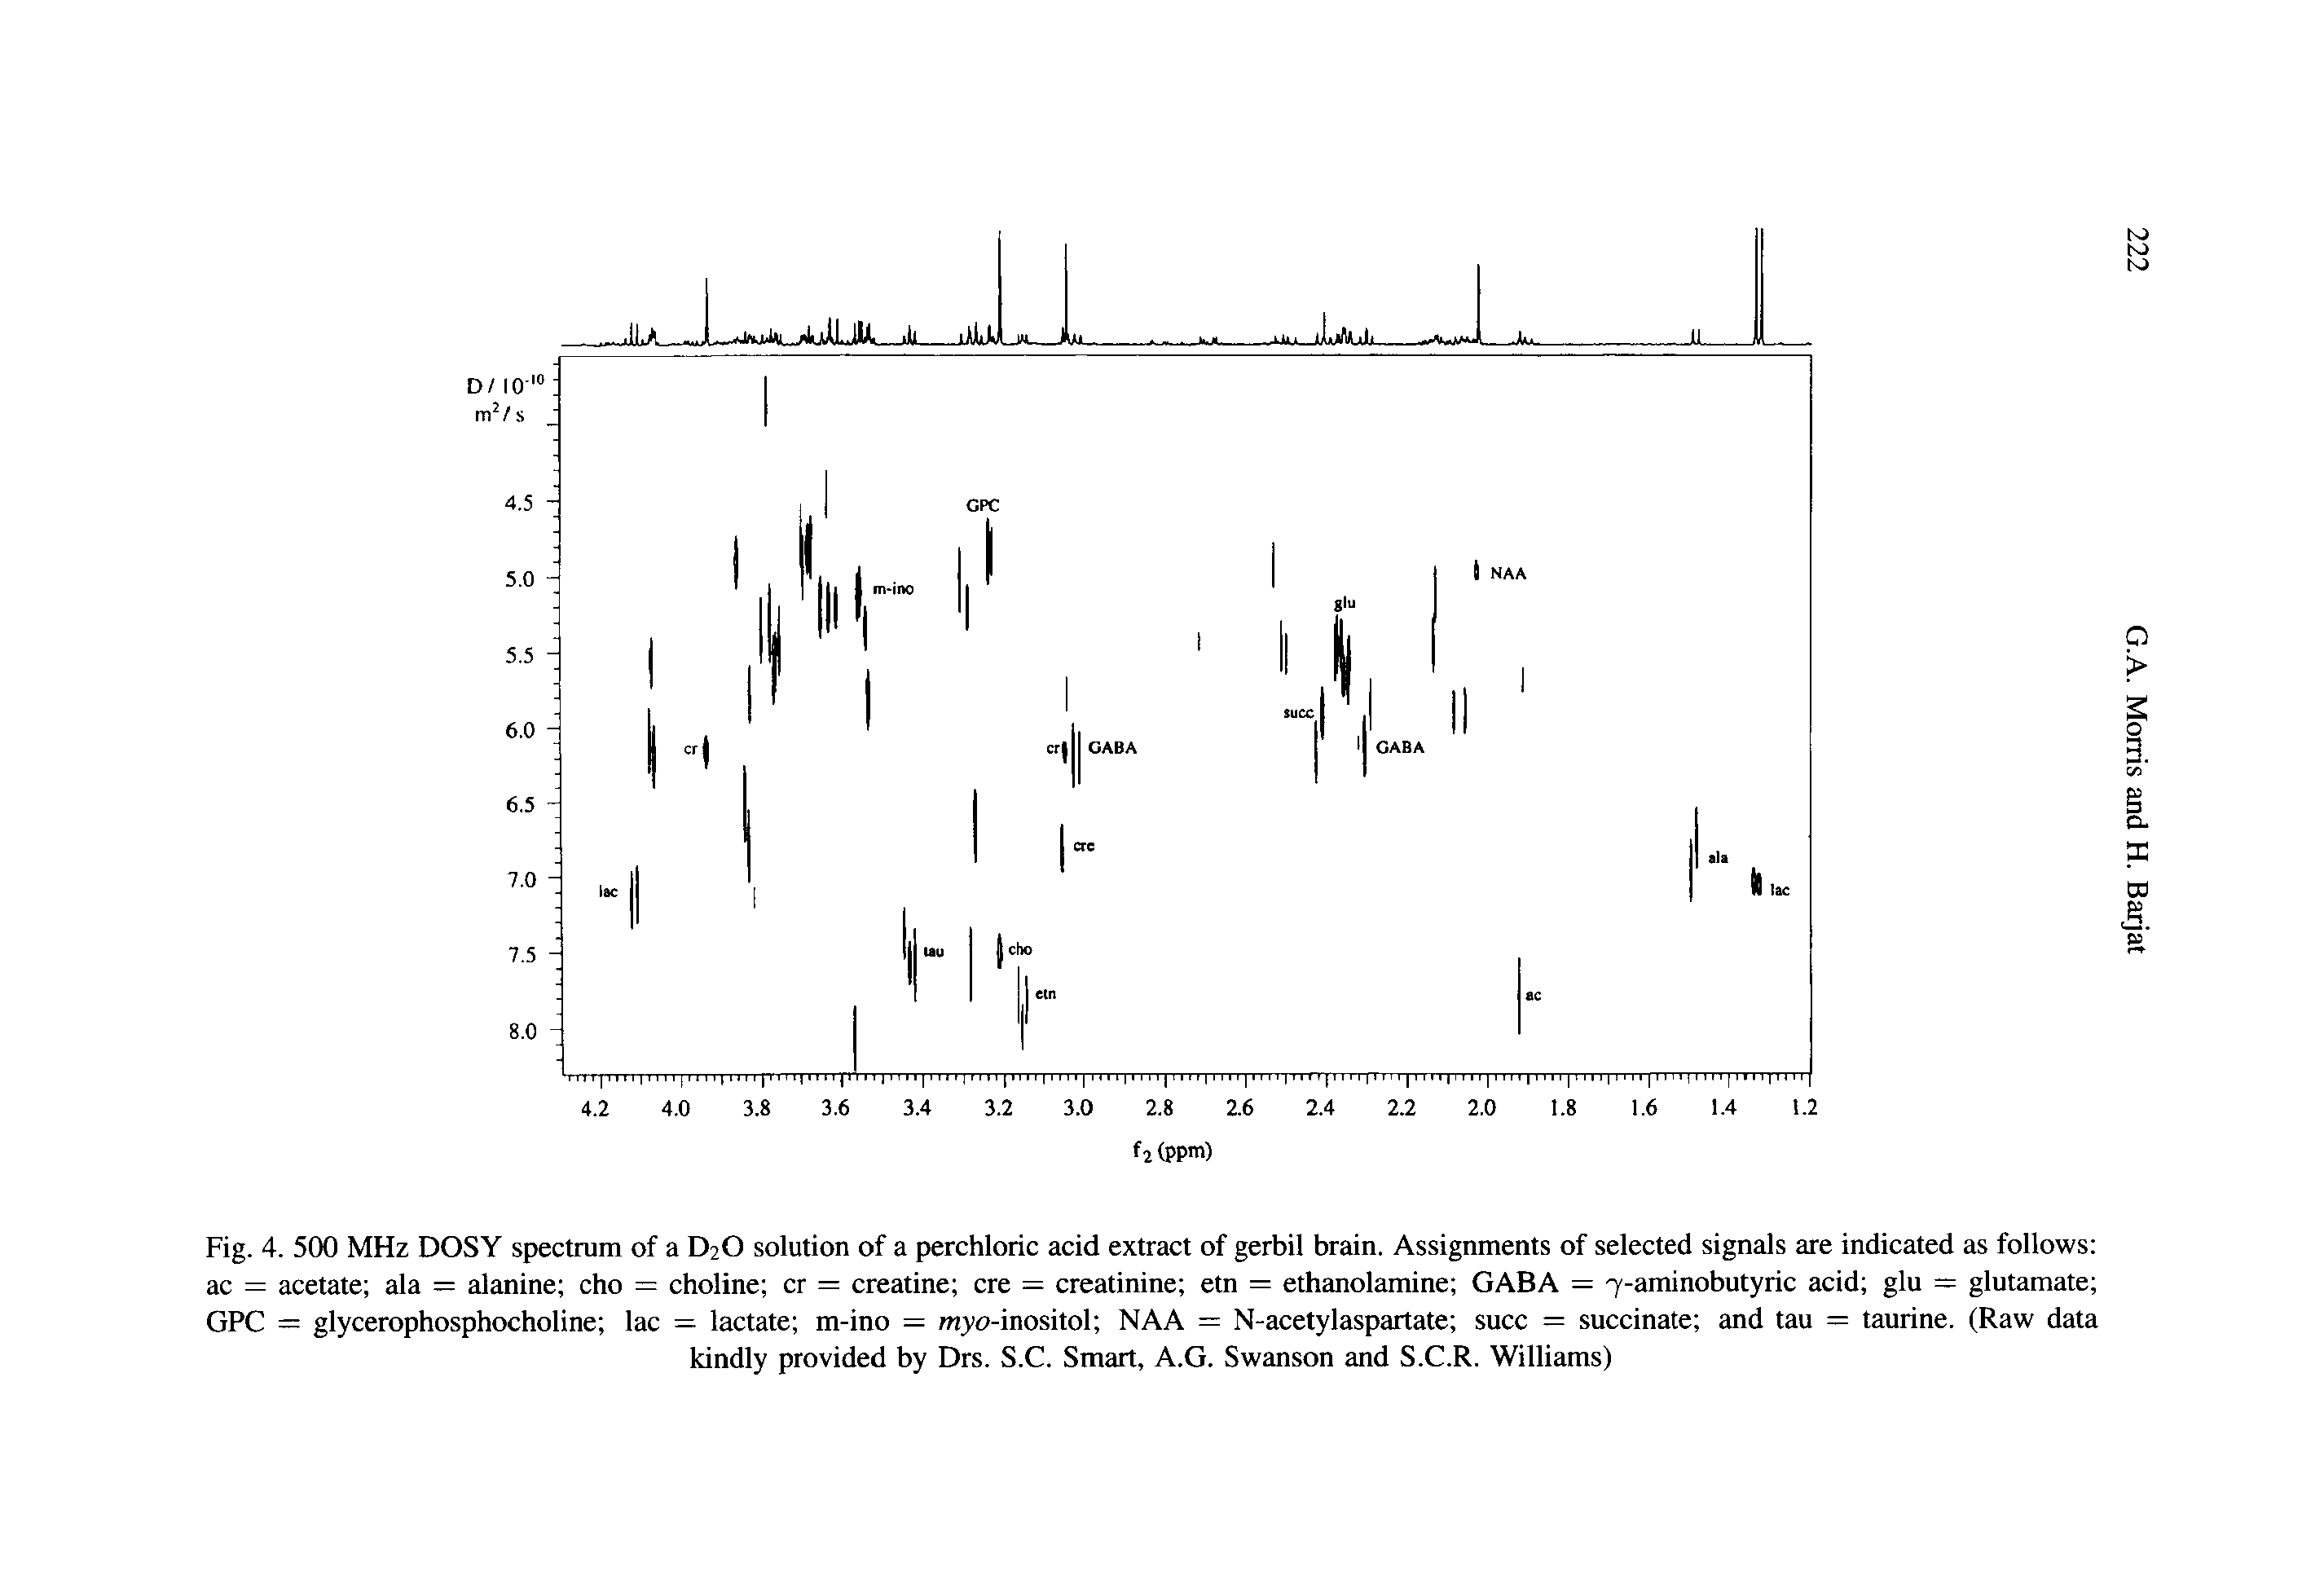 Fig. 4. 500 MHz DOSY spectrum of a D2O solution of a perchloric acid extract of gerbil brain. Assignments of selected signals are indicated as follows ac = acetate ala = alanine cho = choline cr = creatine ere = creatinine etn = ethanolamine GABA = 7-aminobutyric acid glu = glutamate GPC = glycerophosphocholine lac = lactate m-ino = myo-inositol NAA = N-acetylaspartate succ = succinate and tau = taurine. (Raw data...